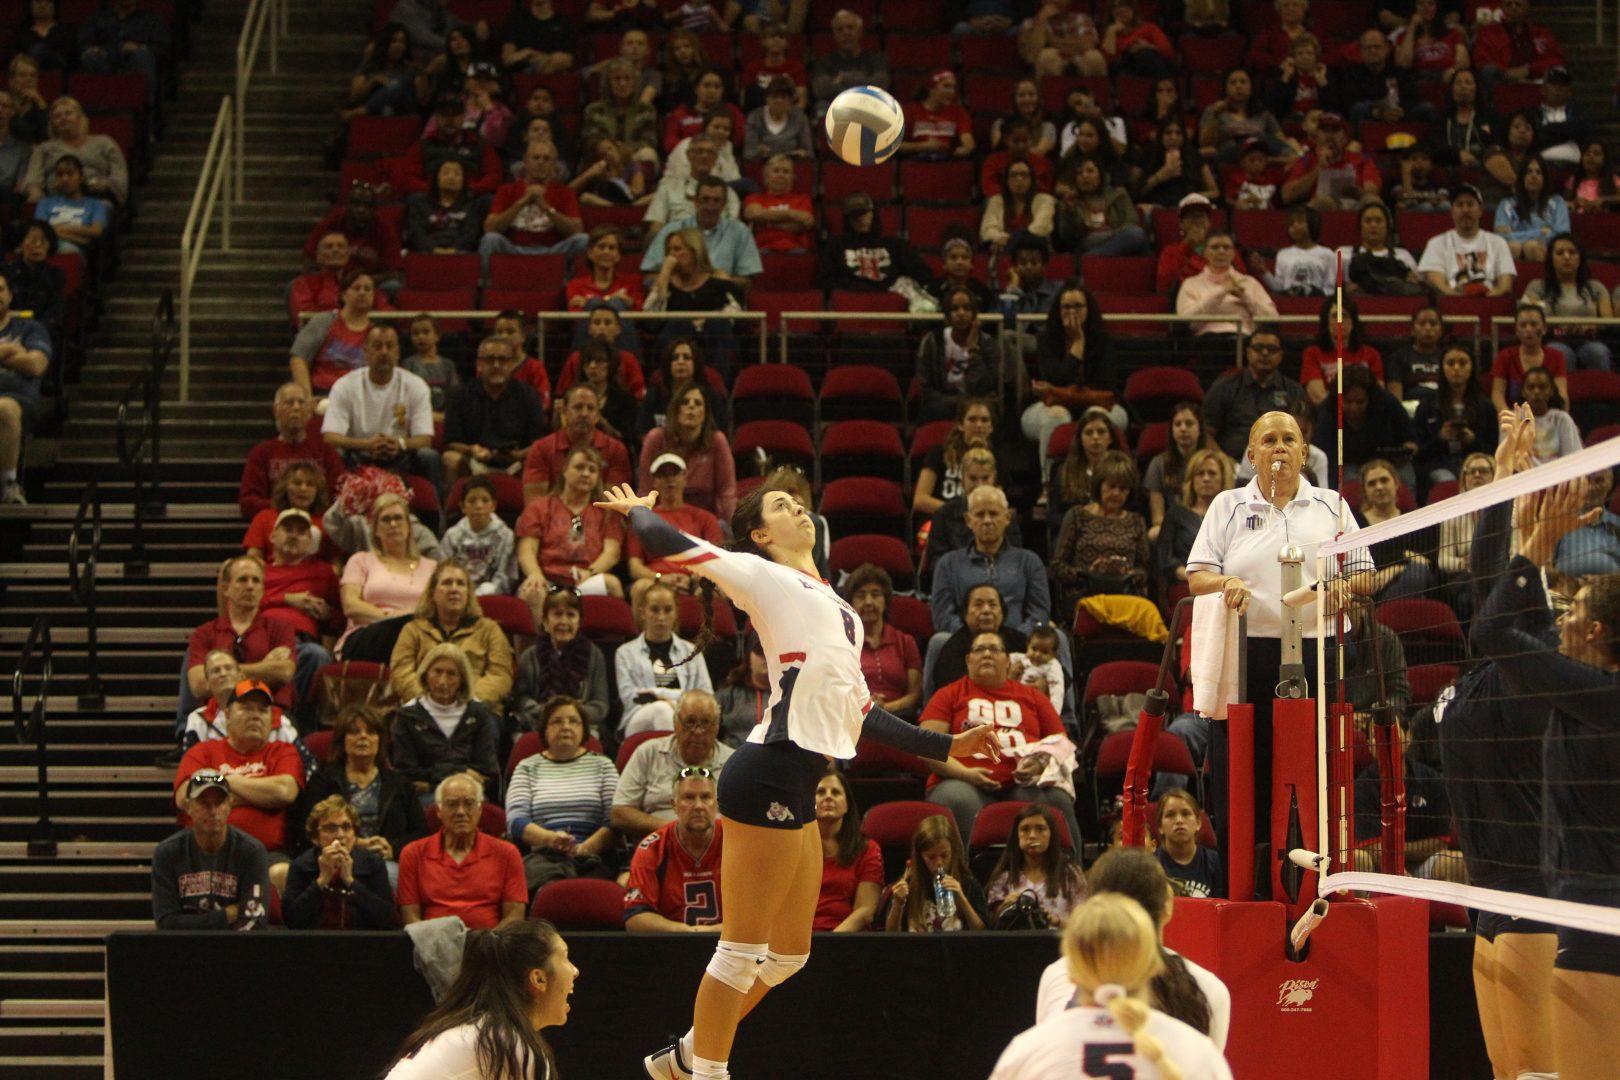 Bulldogs senior Taylor Slover leaps for the ball during a match at home against Utah State on Nov. 3. (Courtesy Fresno State Athletics)